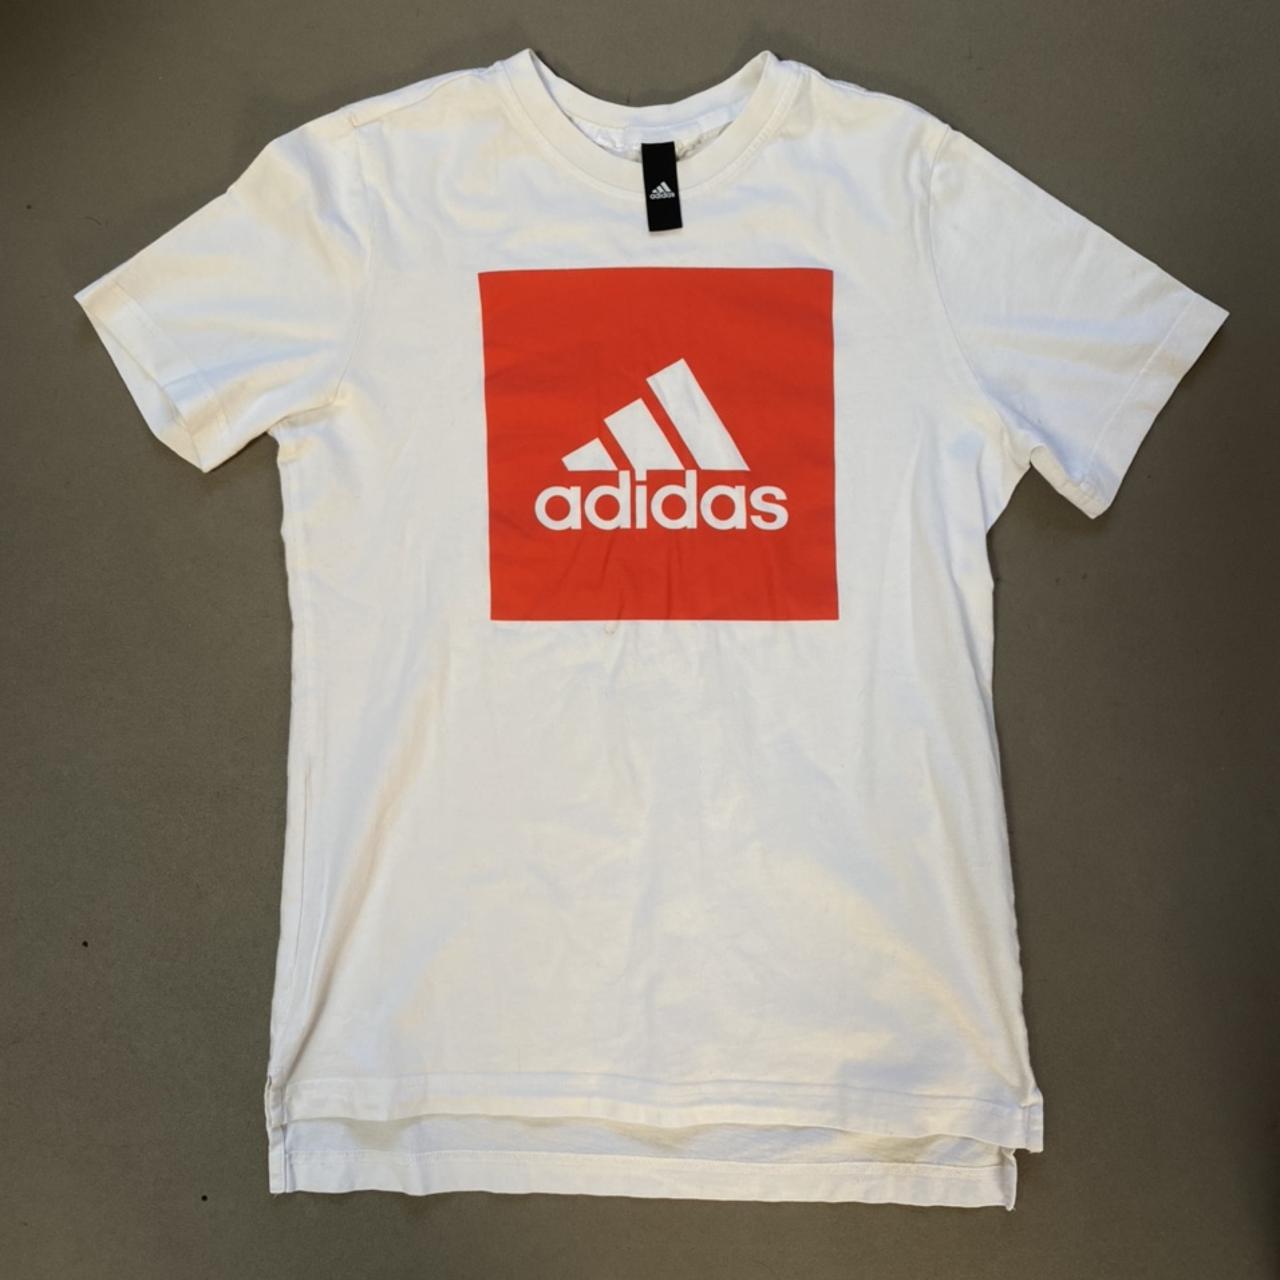 White and red adidas logo tee 🔴⚪️ 🔘 excellent... - Depop